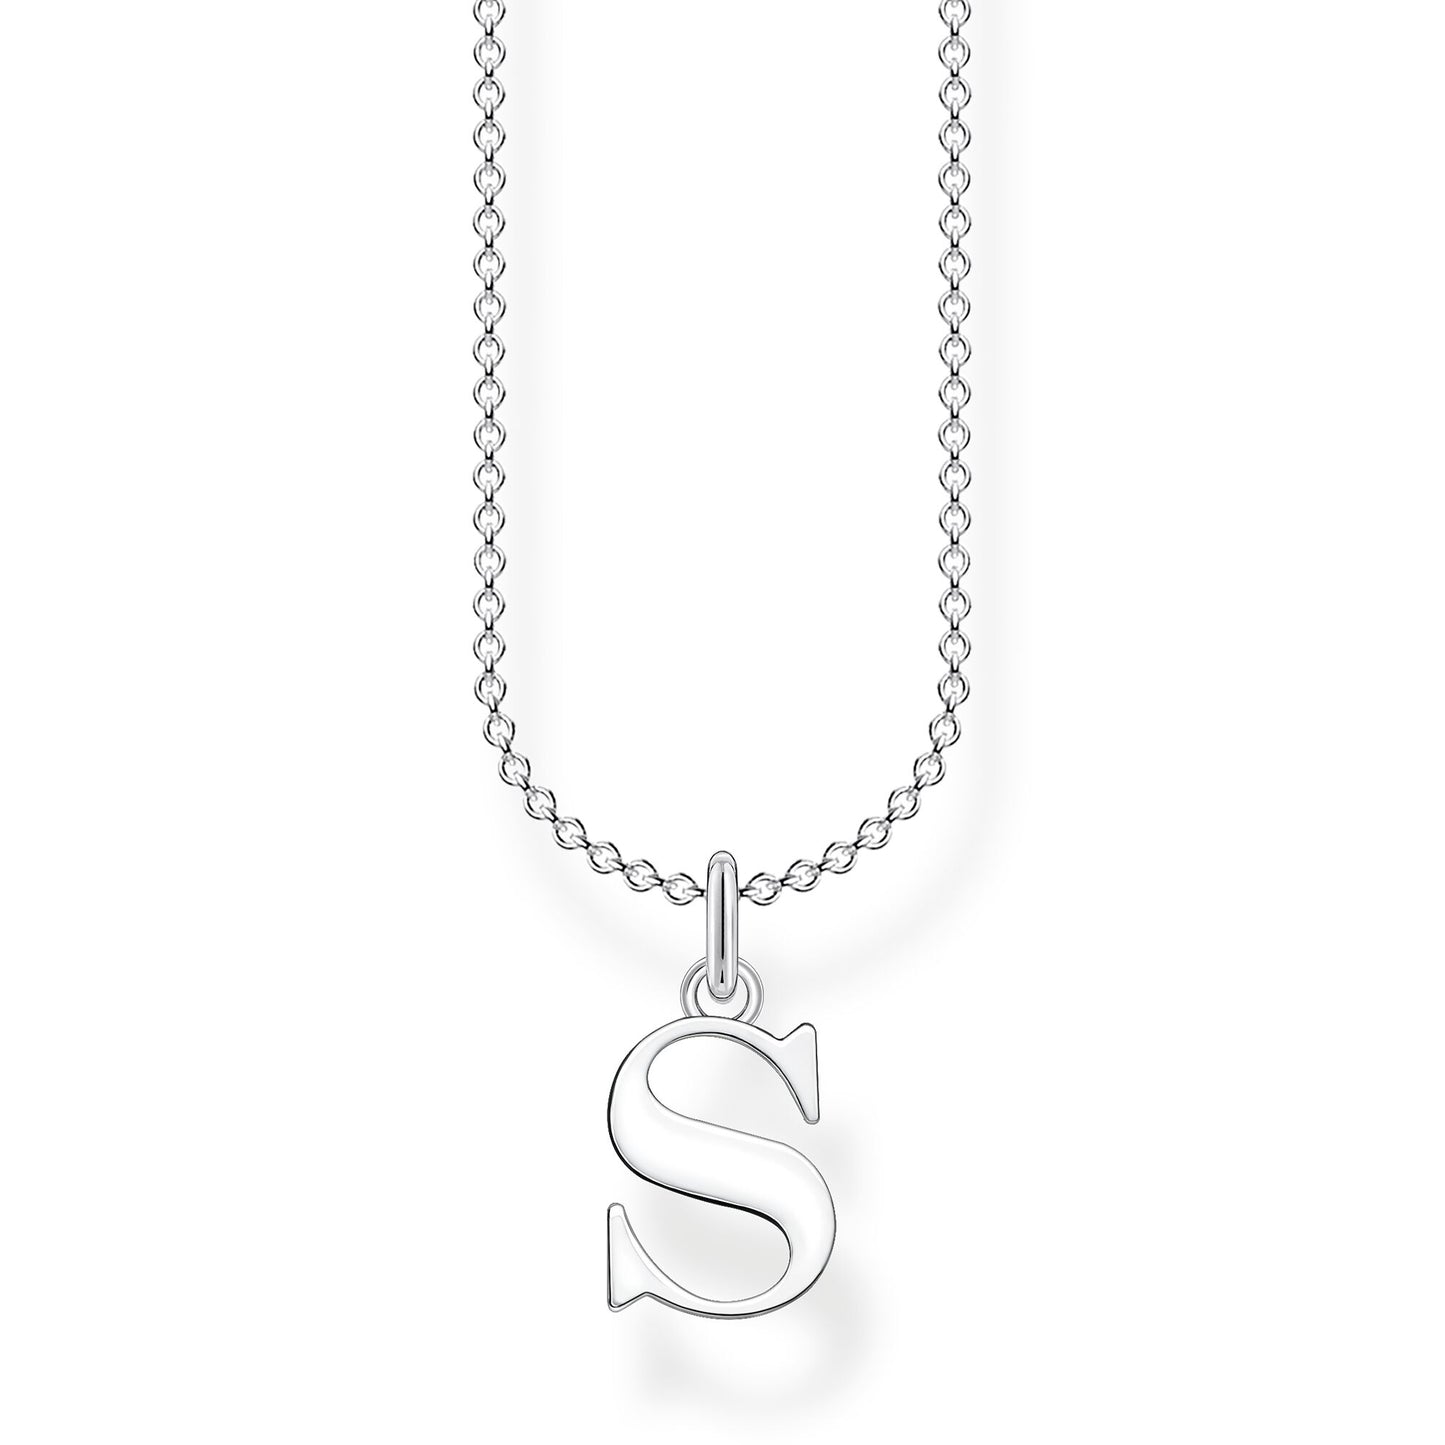 CHARMING COLLECTION LETTER 'S' NECKLACE 38-45CM